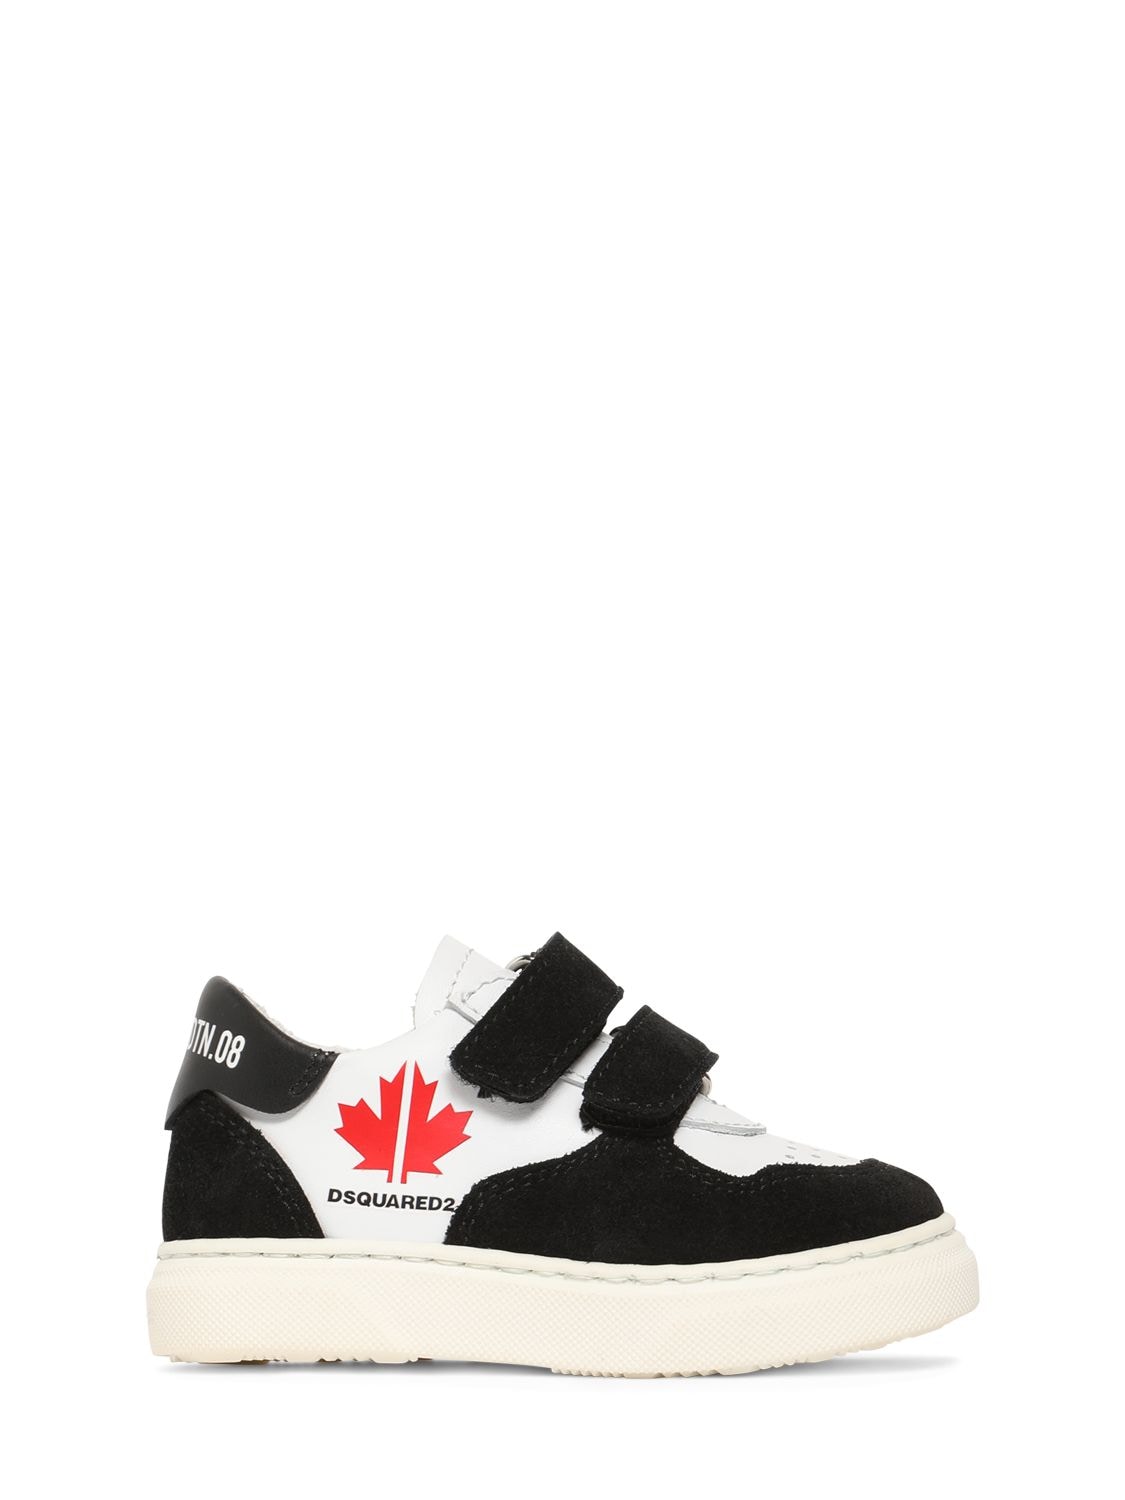 Dsquared2 Kids' Printed Leather Strap Sneakers In White,black